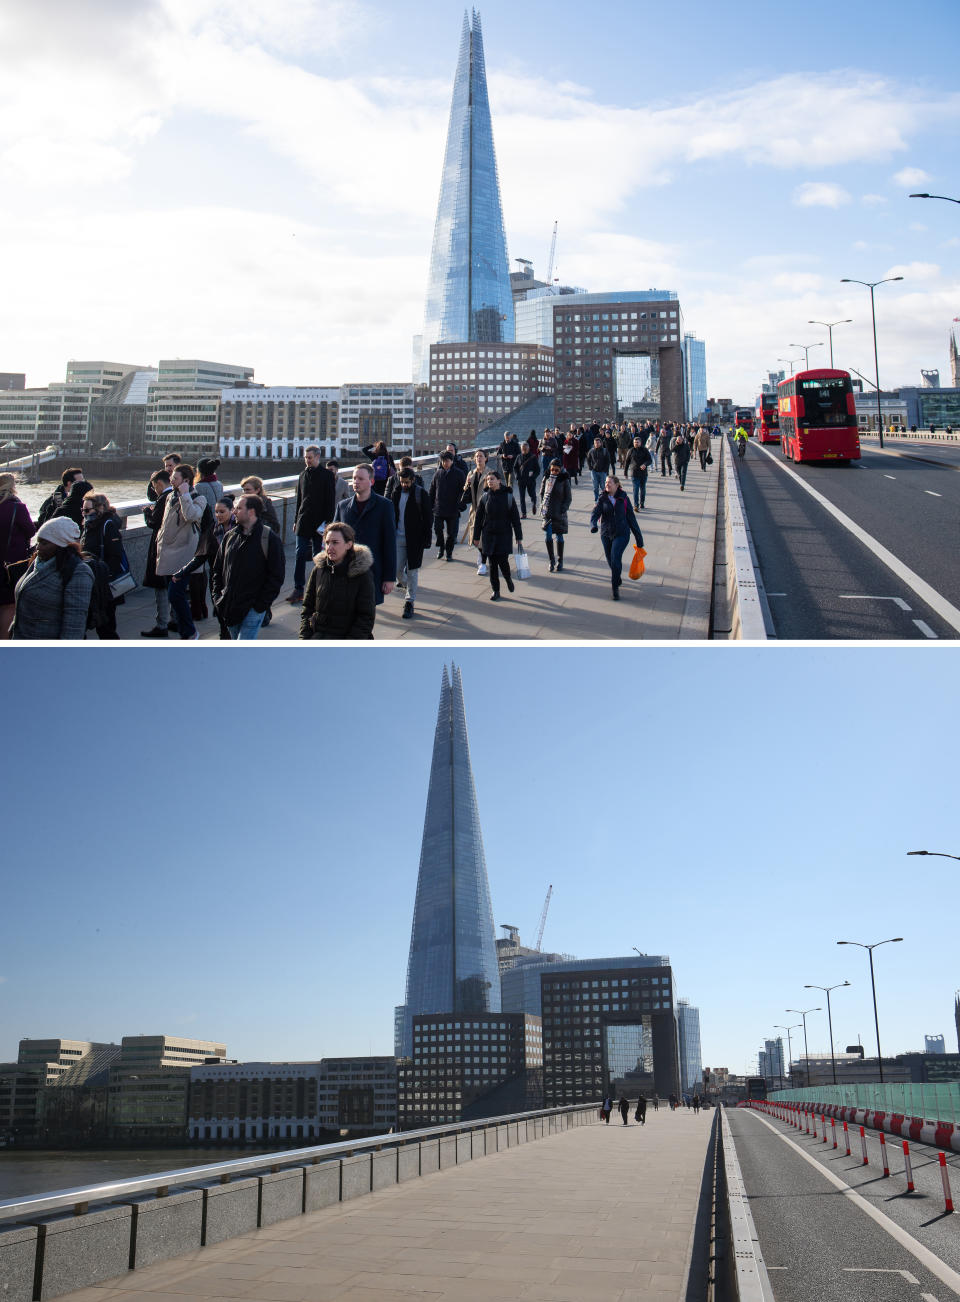 A composite image of of commuters crossing London Bridge on 13/03/20 (top), and on Wednesday 25/03/20 (bottom), after Prime Minister Boris Johnson put the UK in lockdown to help curb the spread of the coronavirus.